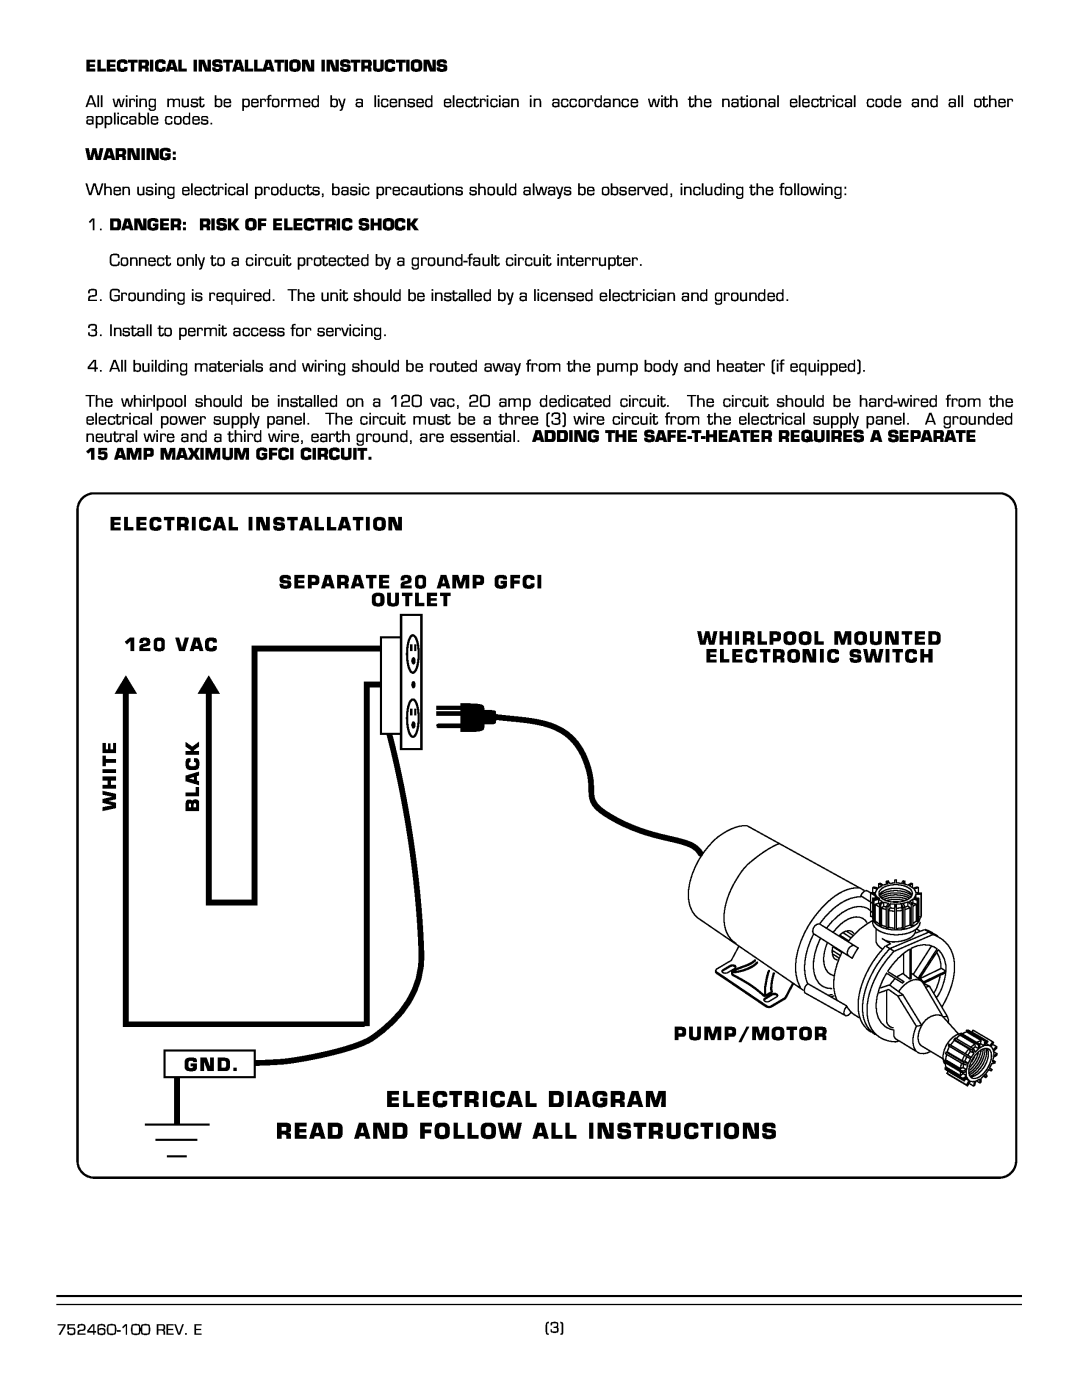 American Standard 2902.XXXW Series Electrical Diagram, Read And Follow All Instructions, Outlet, 120 VAC, White, Black 